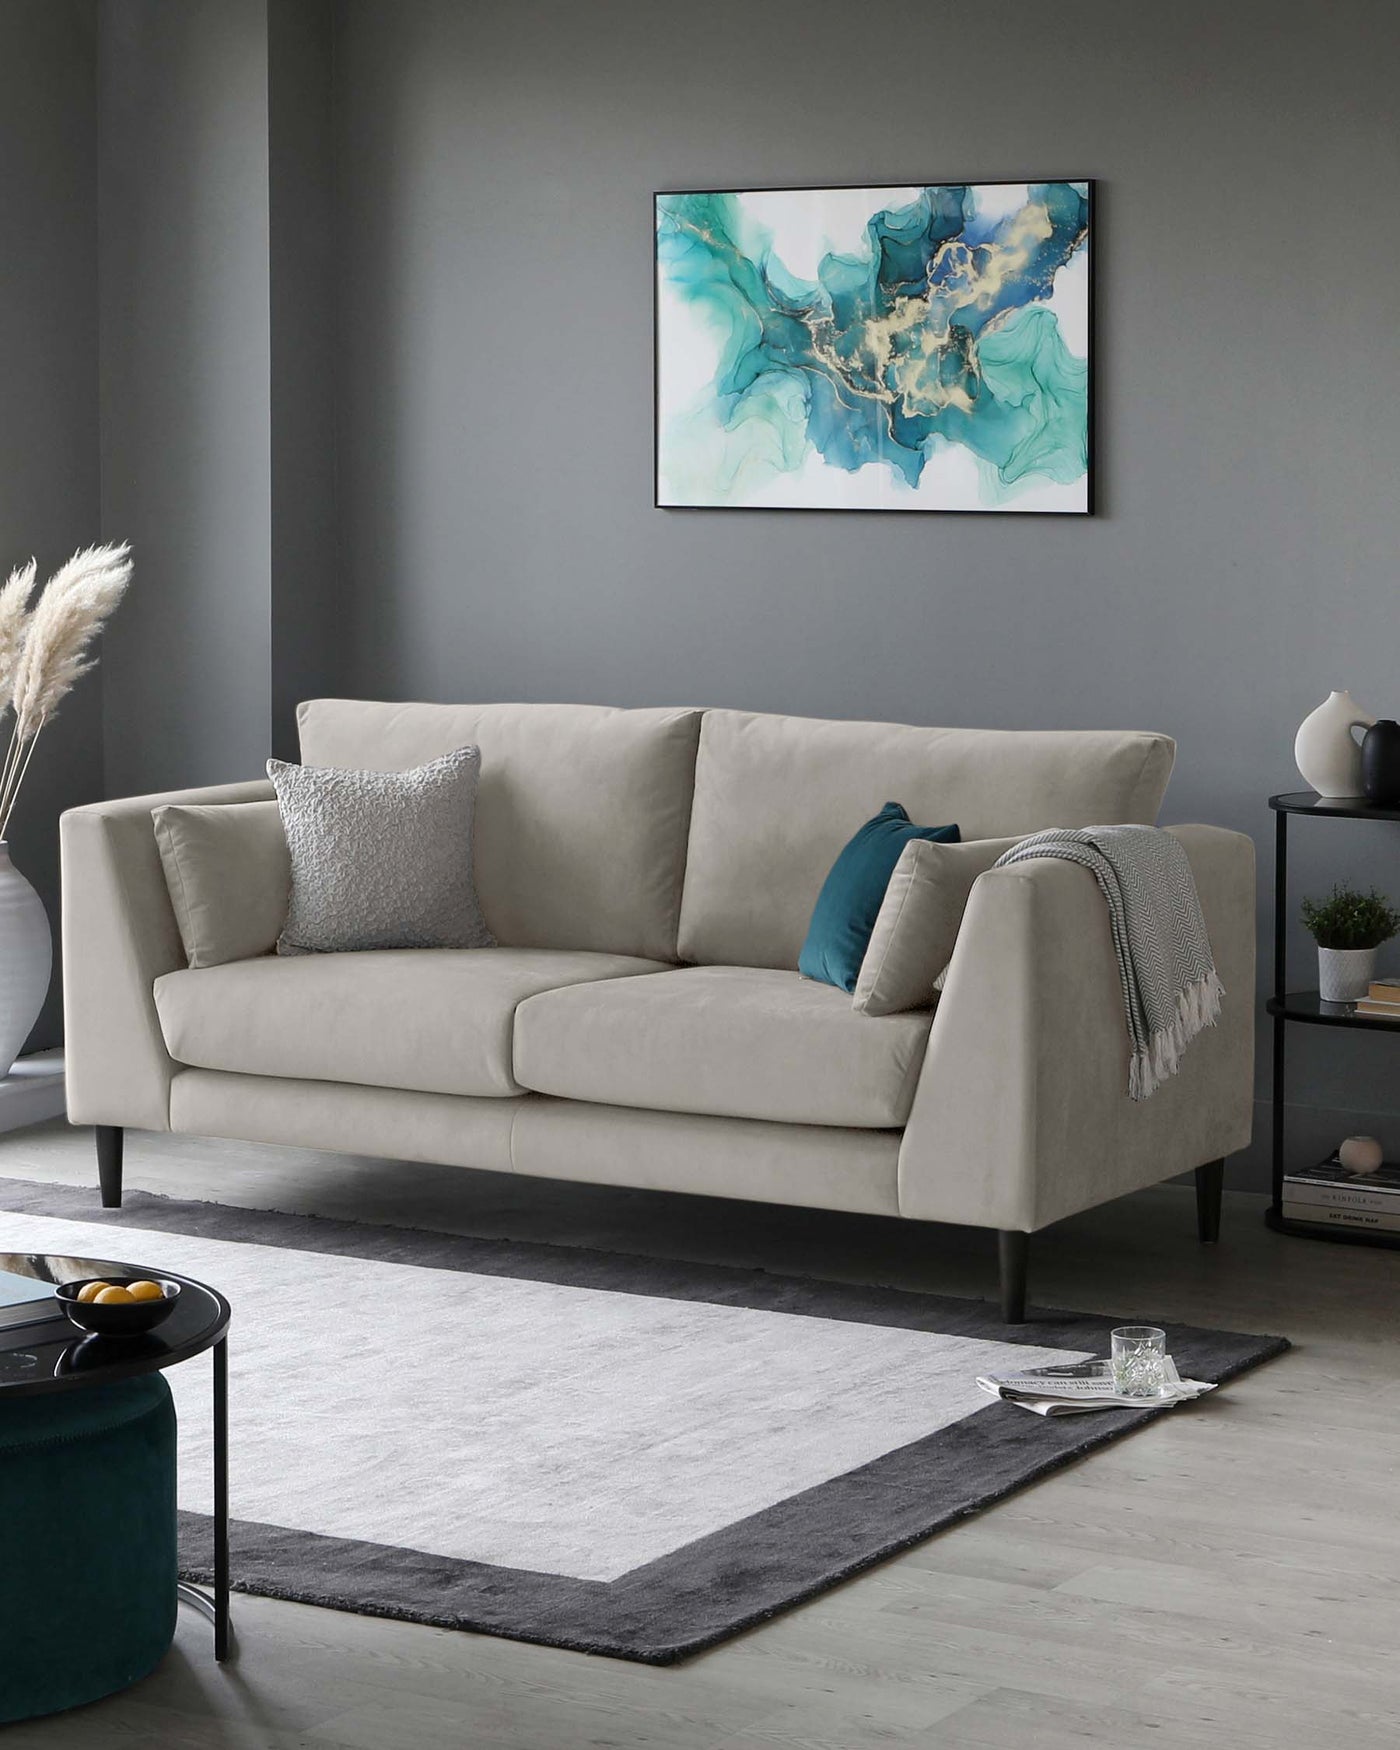 A modern three-seater sofa in a neutral colour with minimalist arm design and clean lines, accompanied by a teal ottoman, a two-tier round coffee table with a matte black finish, and a two-tone grey area rug. Decor includes assorted decorative cushions, a light grey throw blanket, and a small side table with a monochromatic vase. The scene is set against a grey backdrop, highlighting the furniture's contemporary aesthetic.